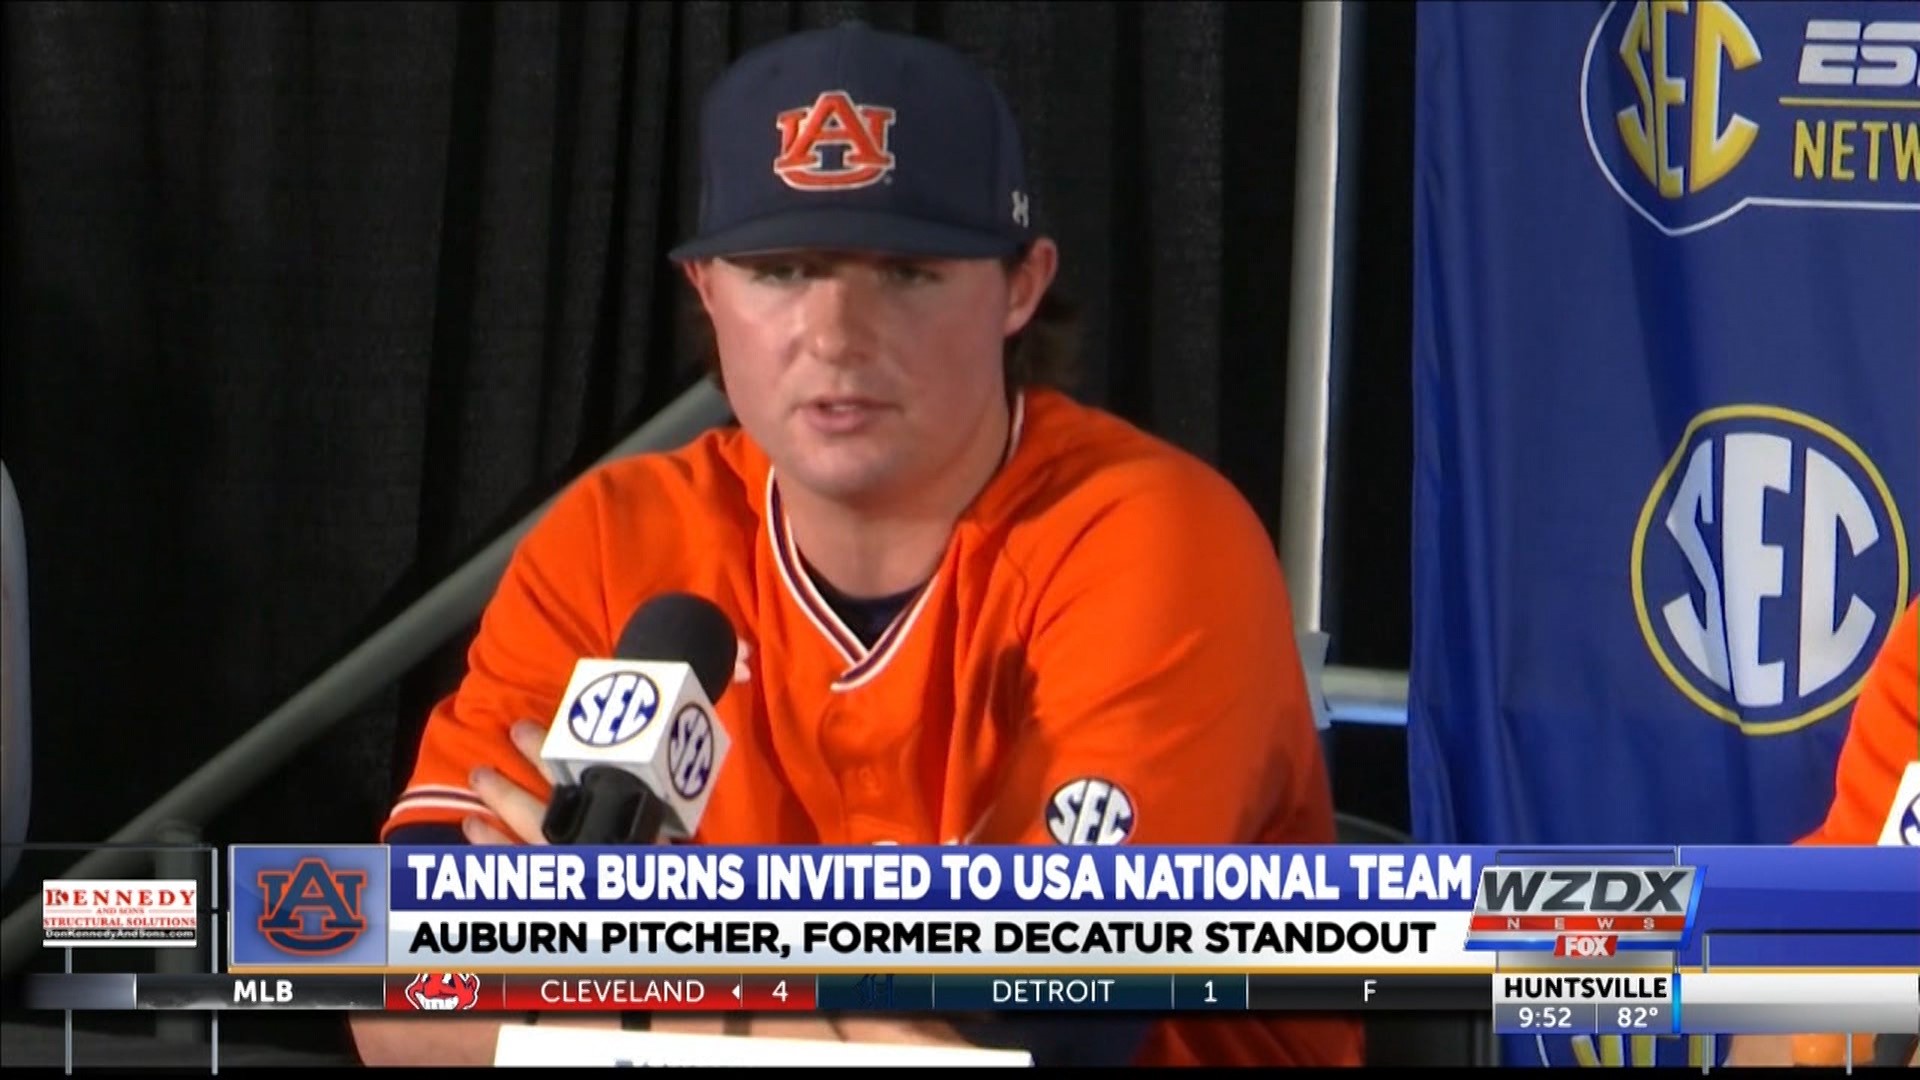 Burns is a former Decatur standout who plays for the Auburn Tigers.